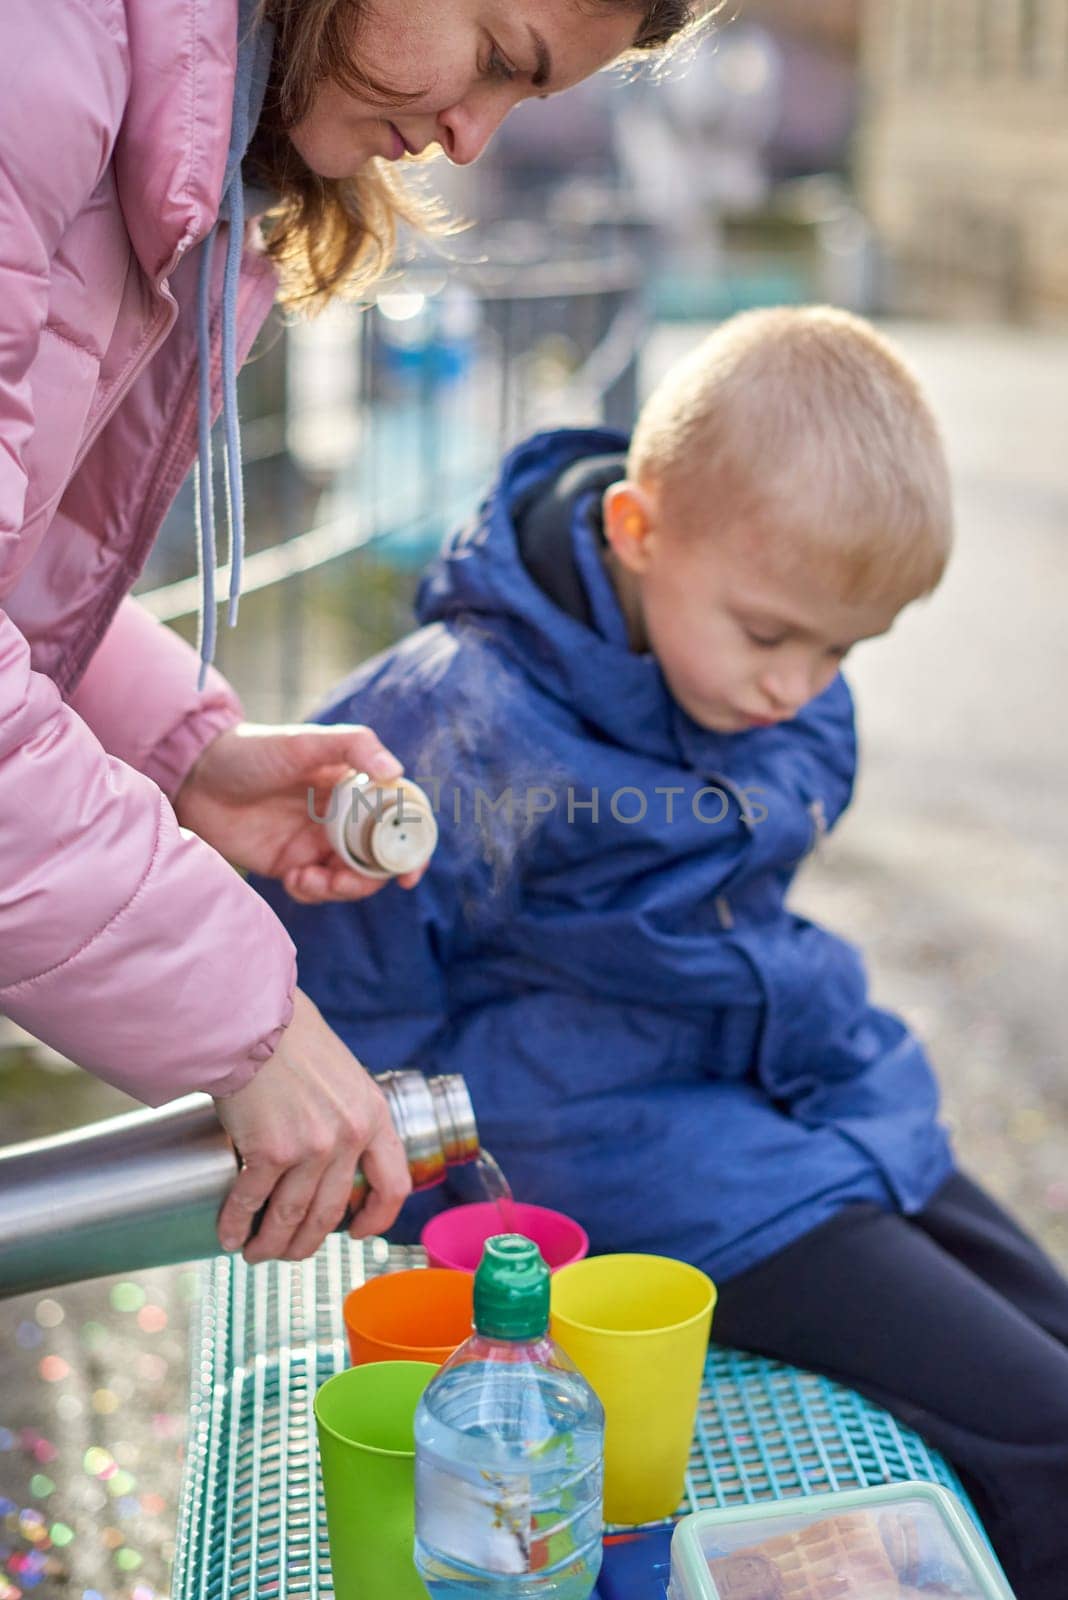 Family Picnic Delight: Cheerful 8-Year-Old Blond Boy in Blue Winter Jacket Sits on Bench While Mom Pours Tea from Thermos, Autumn or Winter. a joyful 8-year-old blond boy in a blue winter jacket, sitting on a bench while his mom pours tea from a thermos into colorful plastic cups. by Andrii_Ko